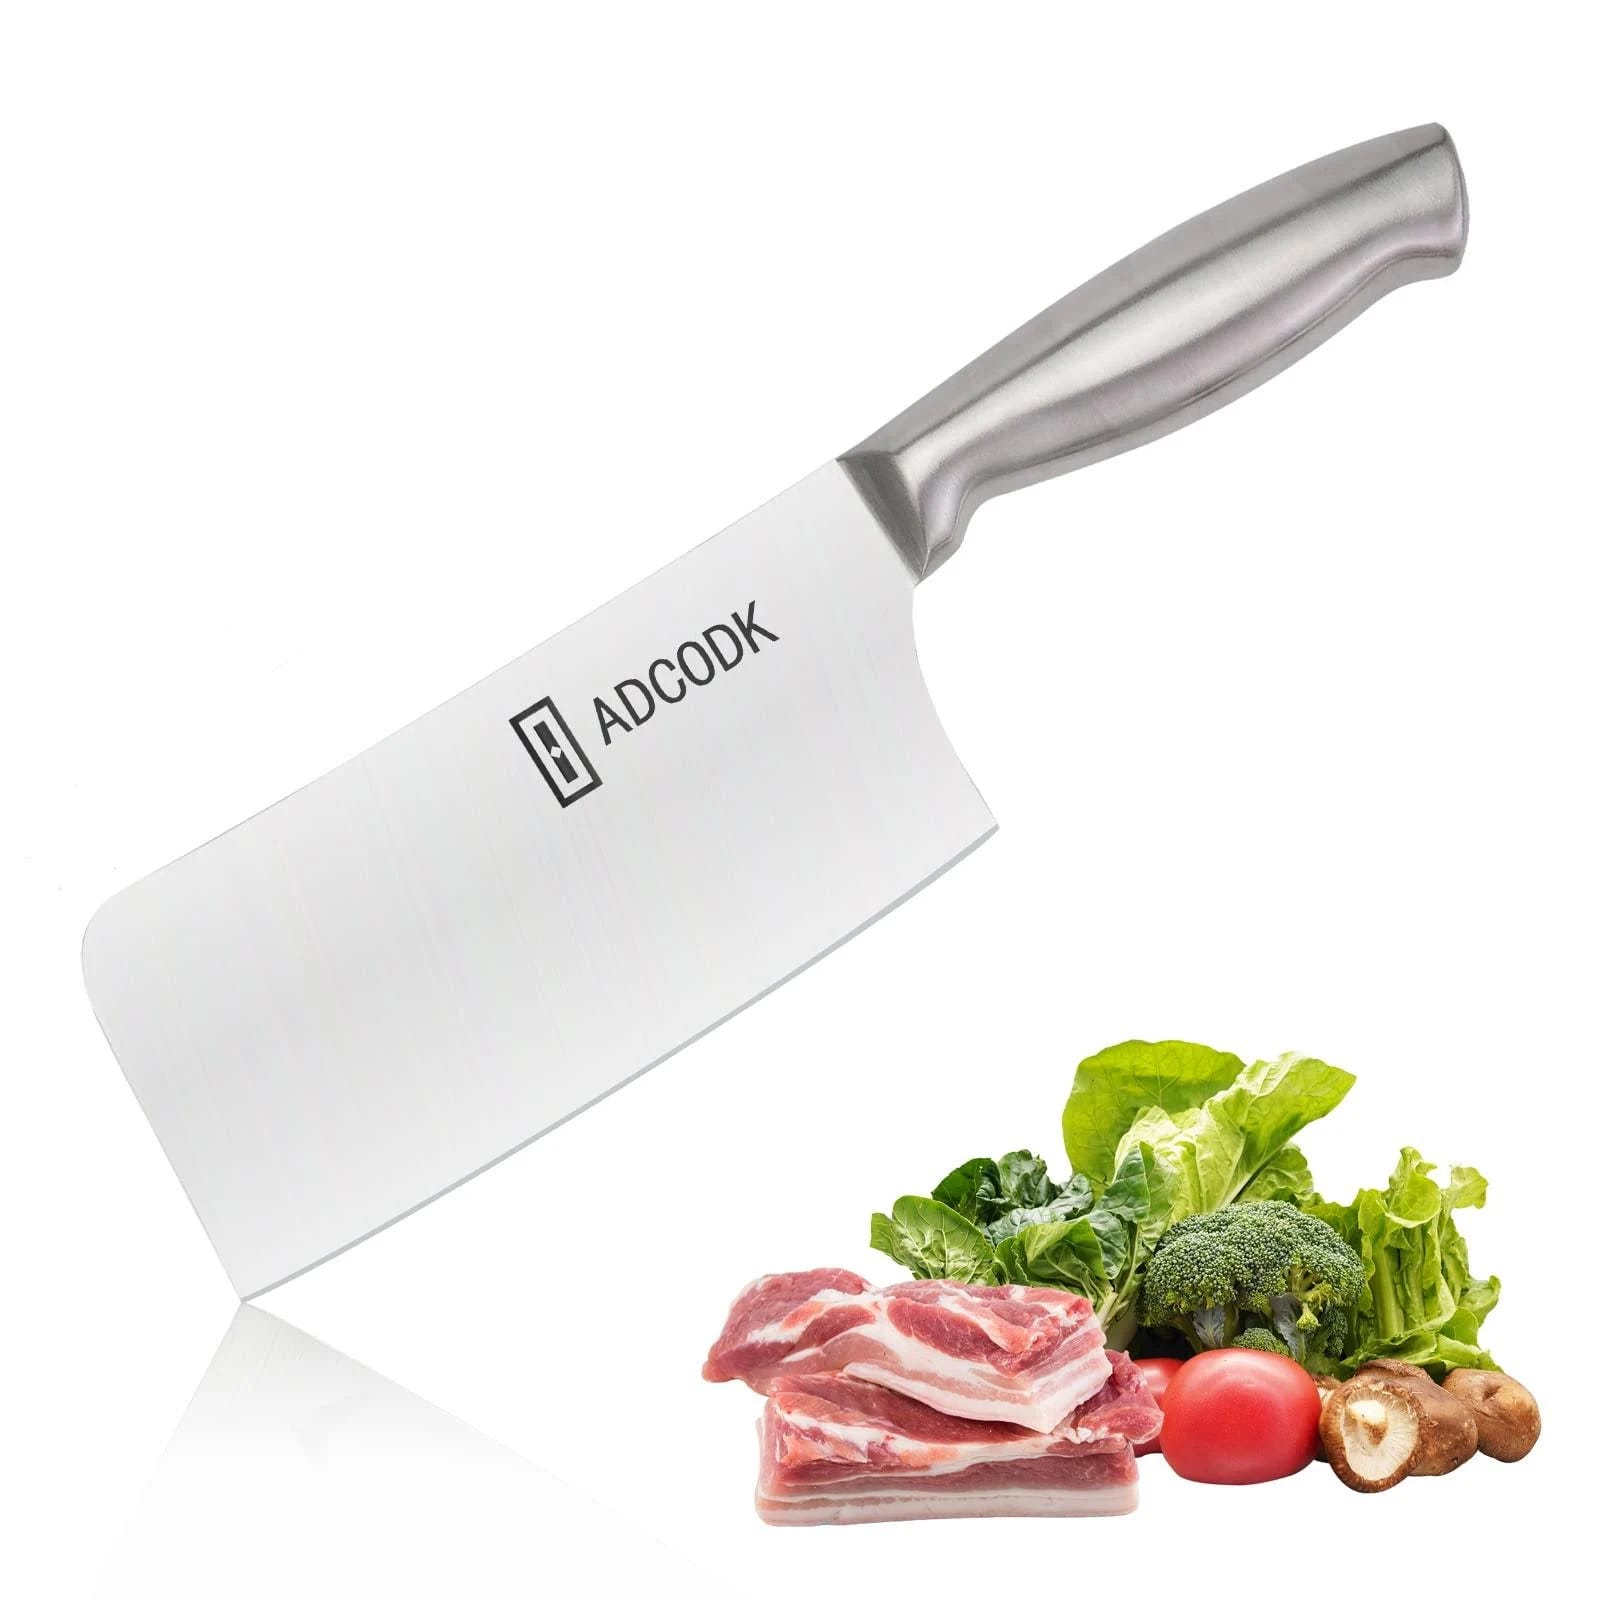 Premium Quality ADCODK Cleaver Knife for Home and Restaurant Use | Image